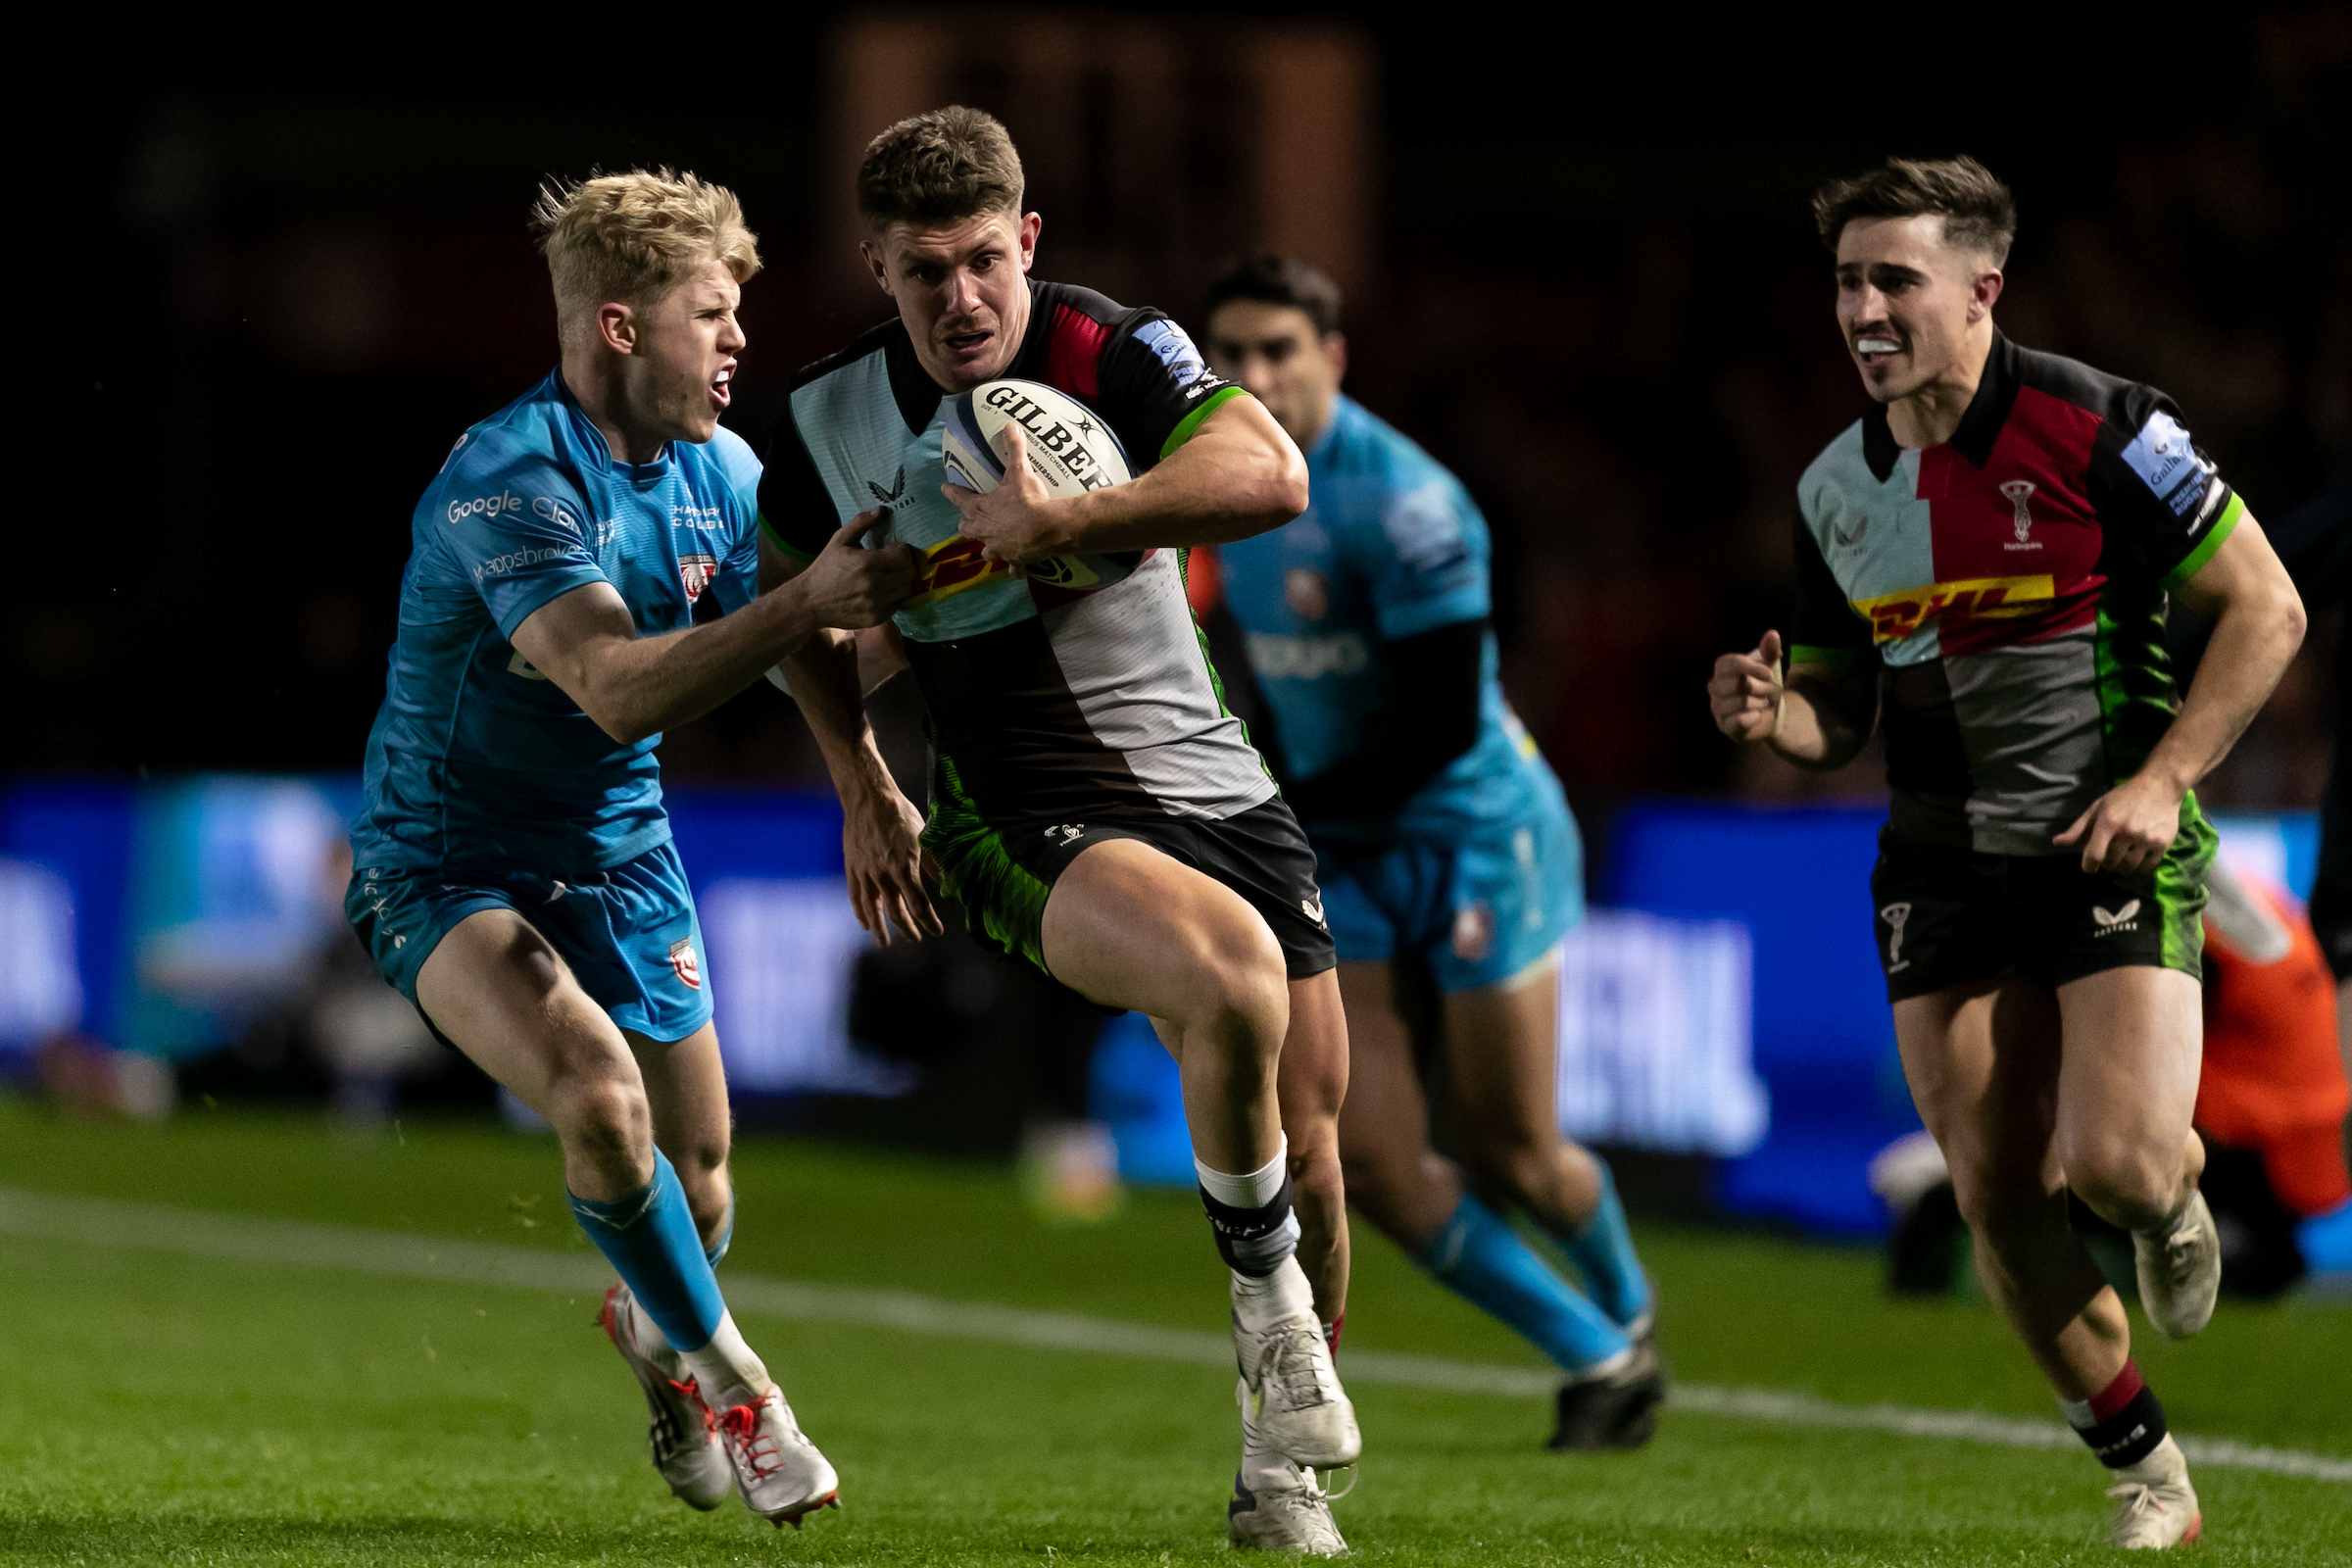 Gloucester away game to be shown on BT Sport Harlequins FC